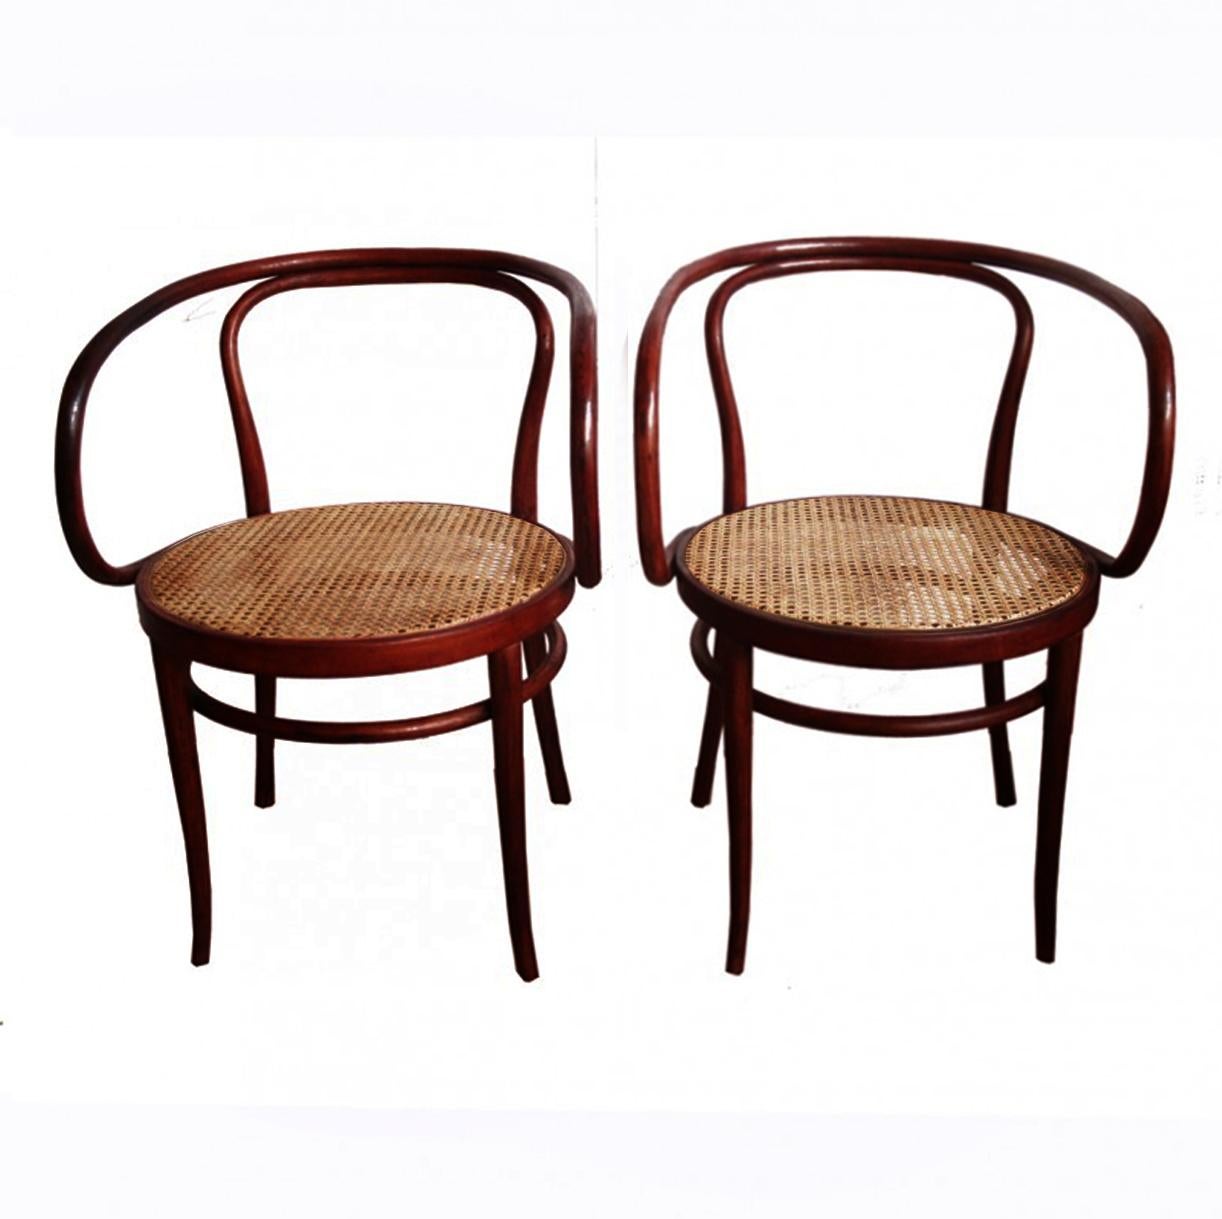 Pair of chairs after Thonet, from the years between 1955-1965.

This is Le Corbusier's favorite chair and one of the favorite designs of architects and designers.

Unfortunately it has no label but it is in perfect condition, with minimal wear and a